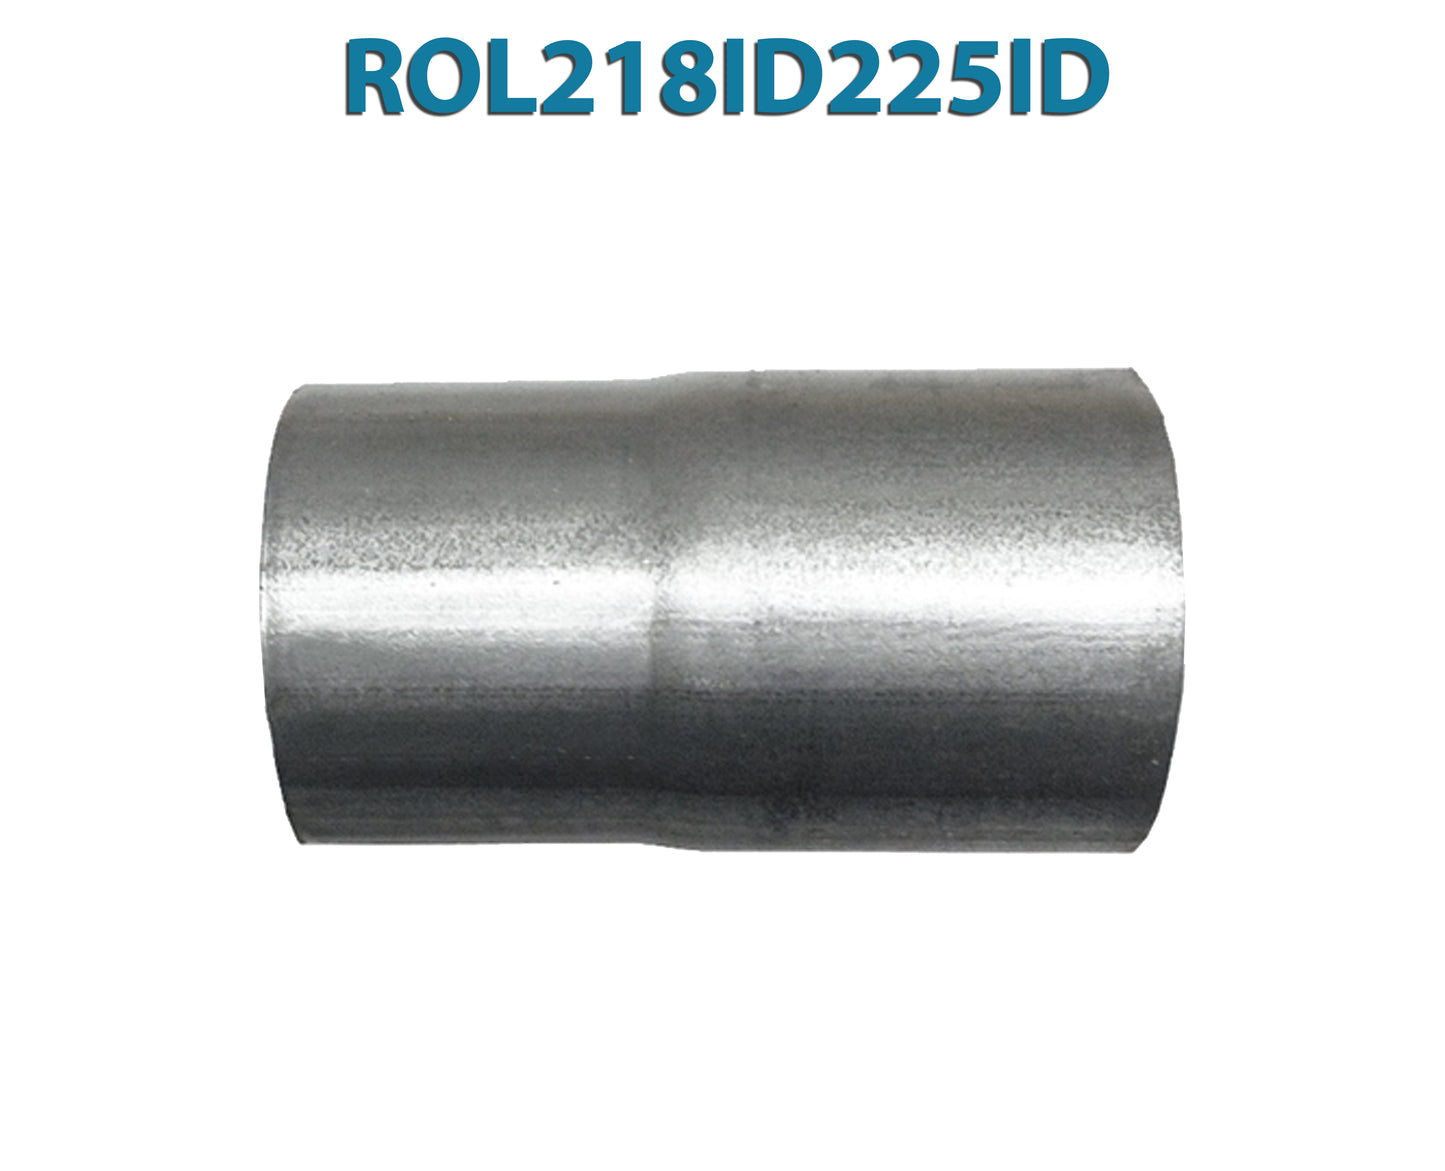 ROL218ID225ID 548547 2 1/8” ID to 2 1/4” ID Universal Exhaust Pipe to Pipe Adapter Reducer